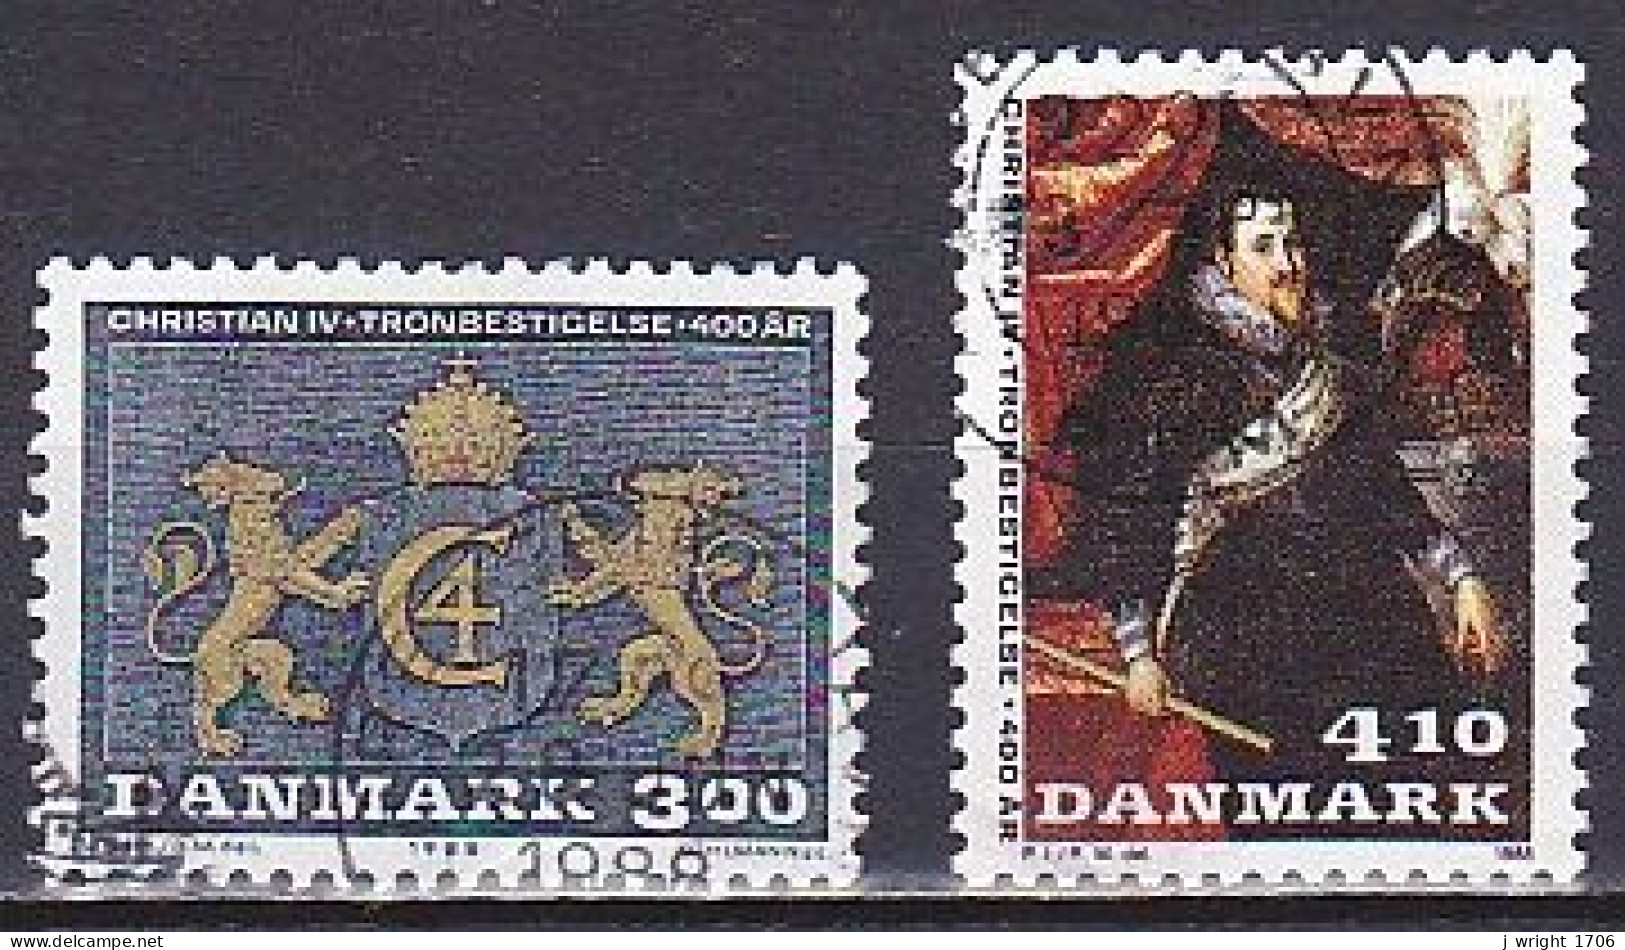 Denmark, 1988, King Christian IV Accession 400th Anniv, Set, USED - Used Stamps